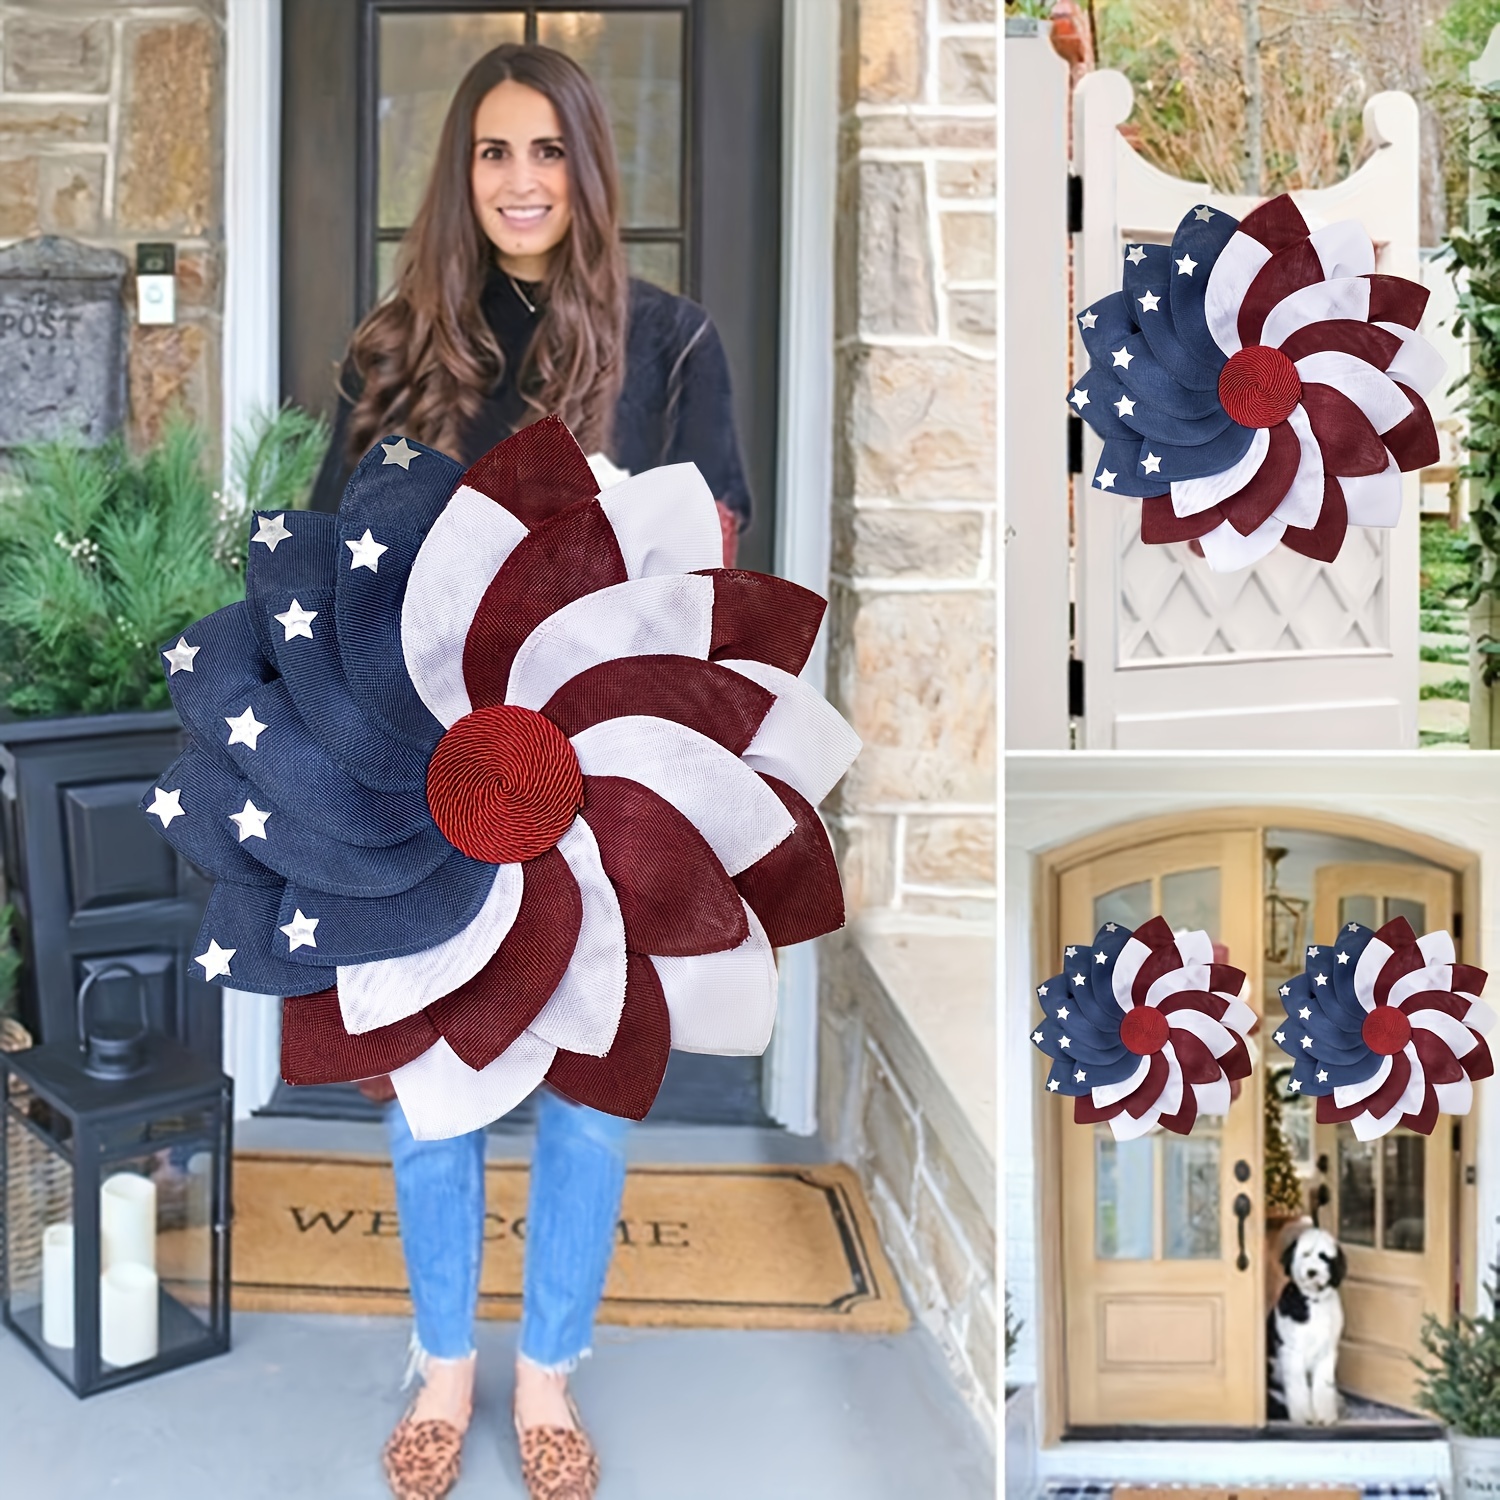 

Patriotic 4th Of July Wreath - Red, White & Blue Independence Day Door Decor With Stars And Stripes, No Power Needed, Easy Wall Hanging